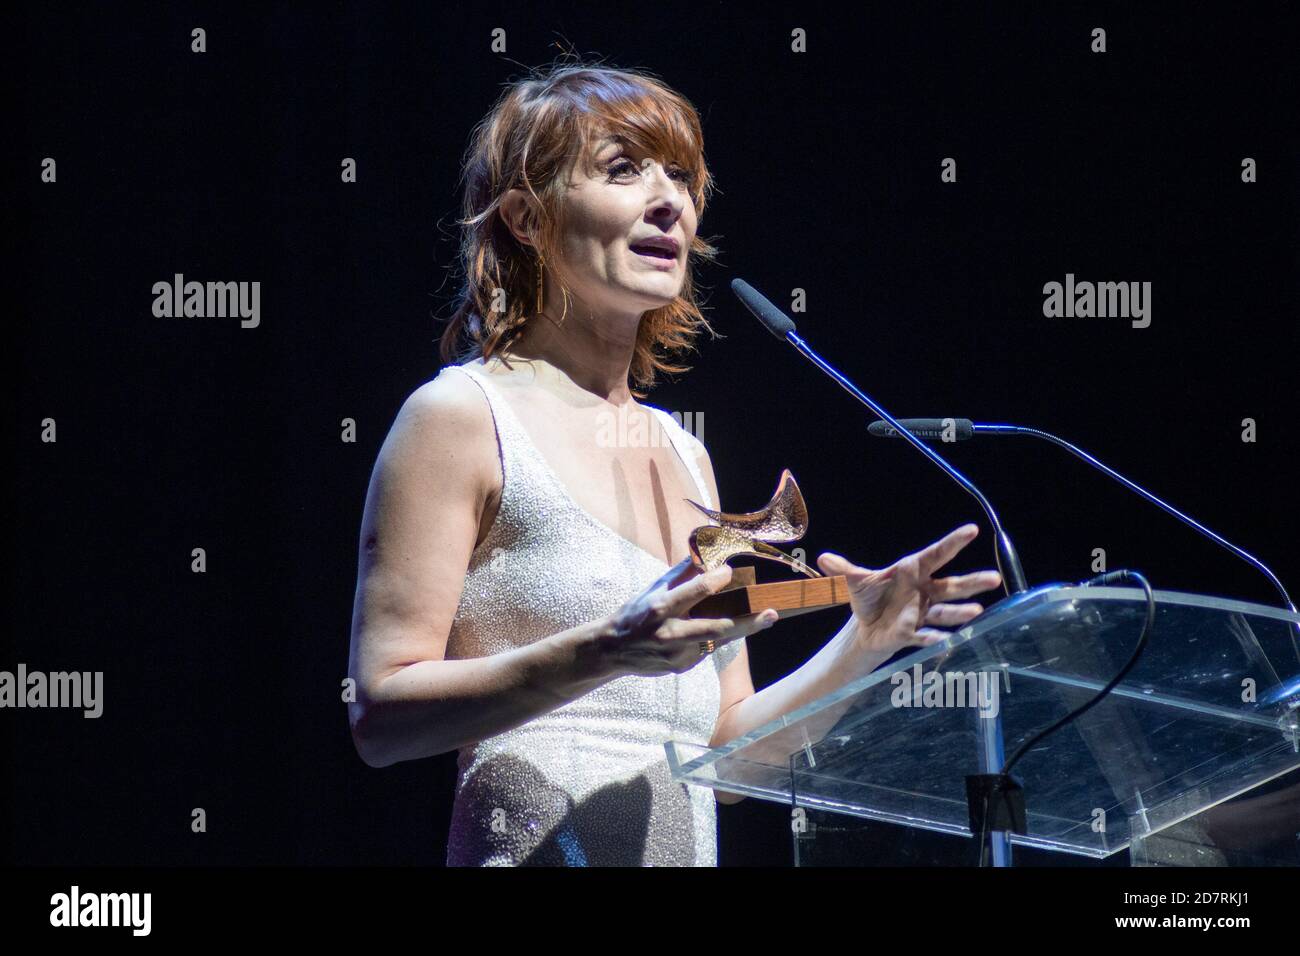 Nathalie Poza receives her award from 'Union de Actores' Awards 2020 at Teatro Circo Price in Madrid, Spain.March 09, 2020. (Oscar Gil / Alfa Images) Stock Photo